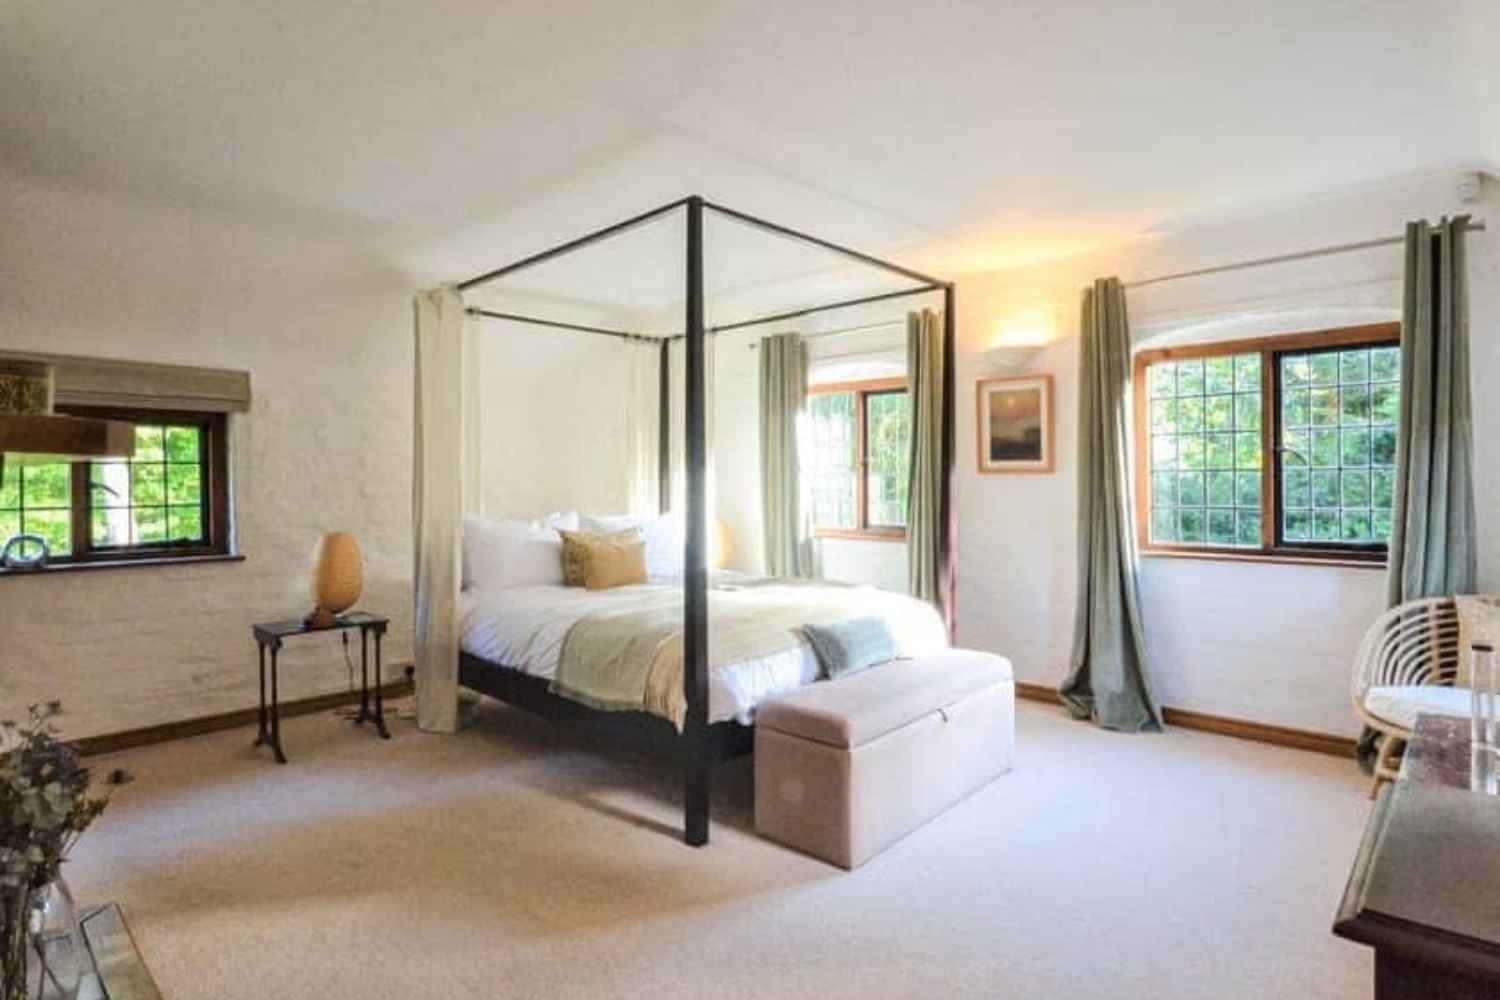 The Master Bedroom is stunningly simple